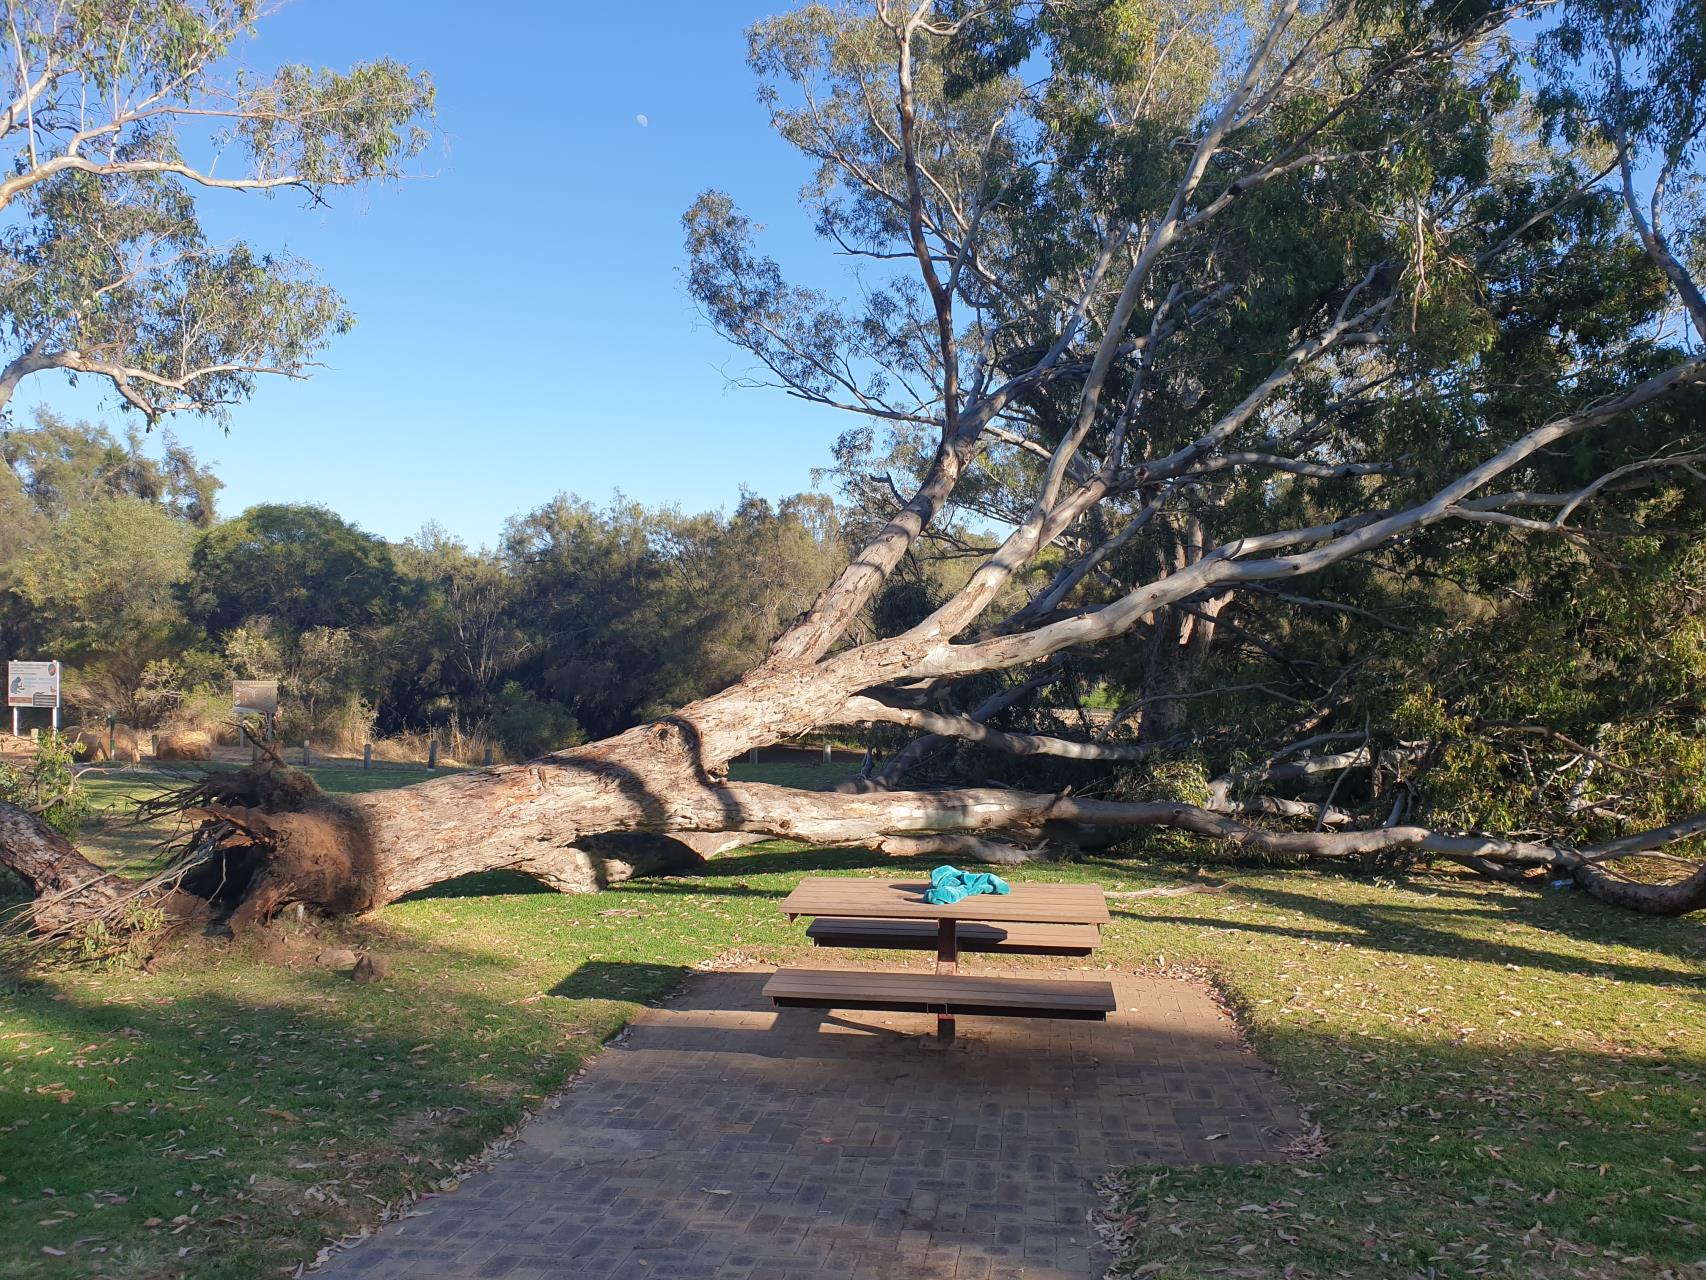 Notification – Uprooted Tree in Duidgee Park